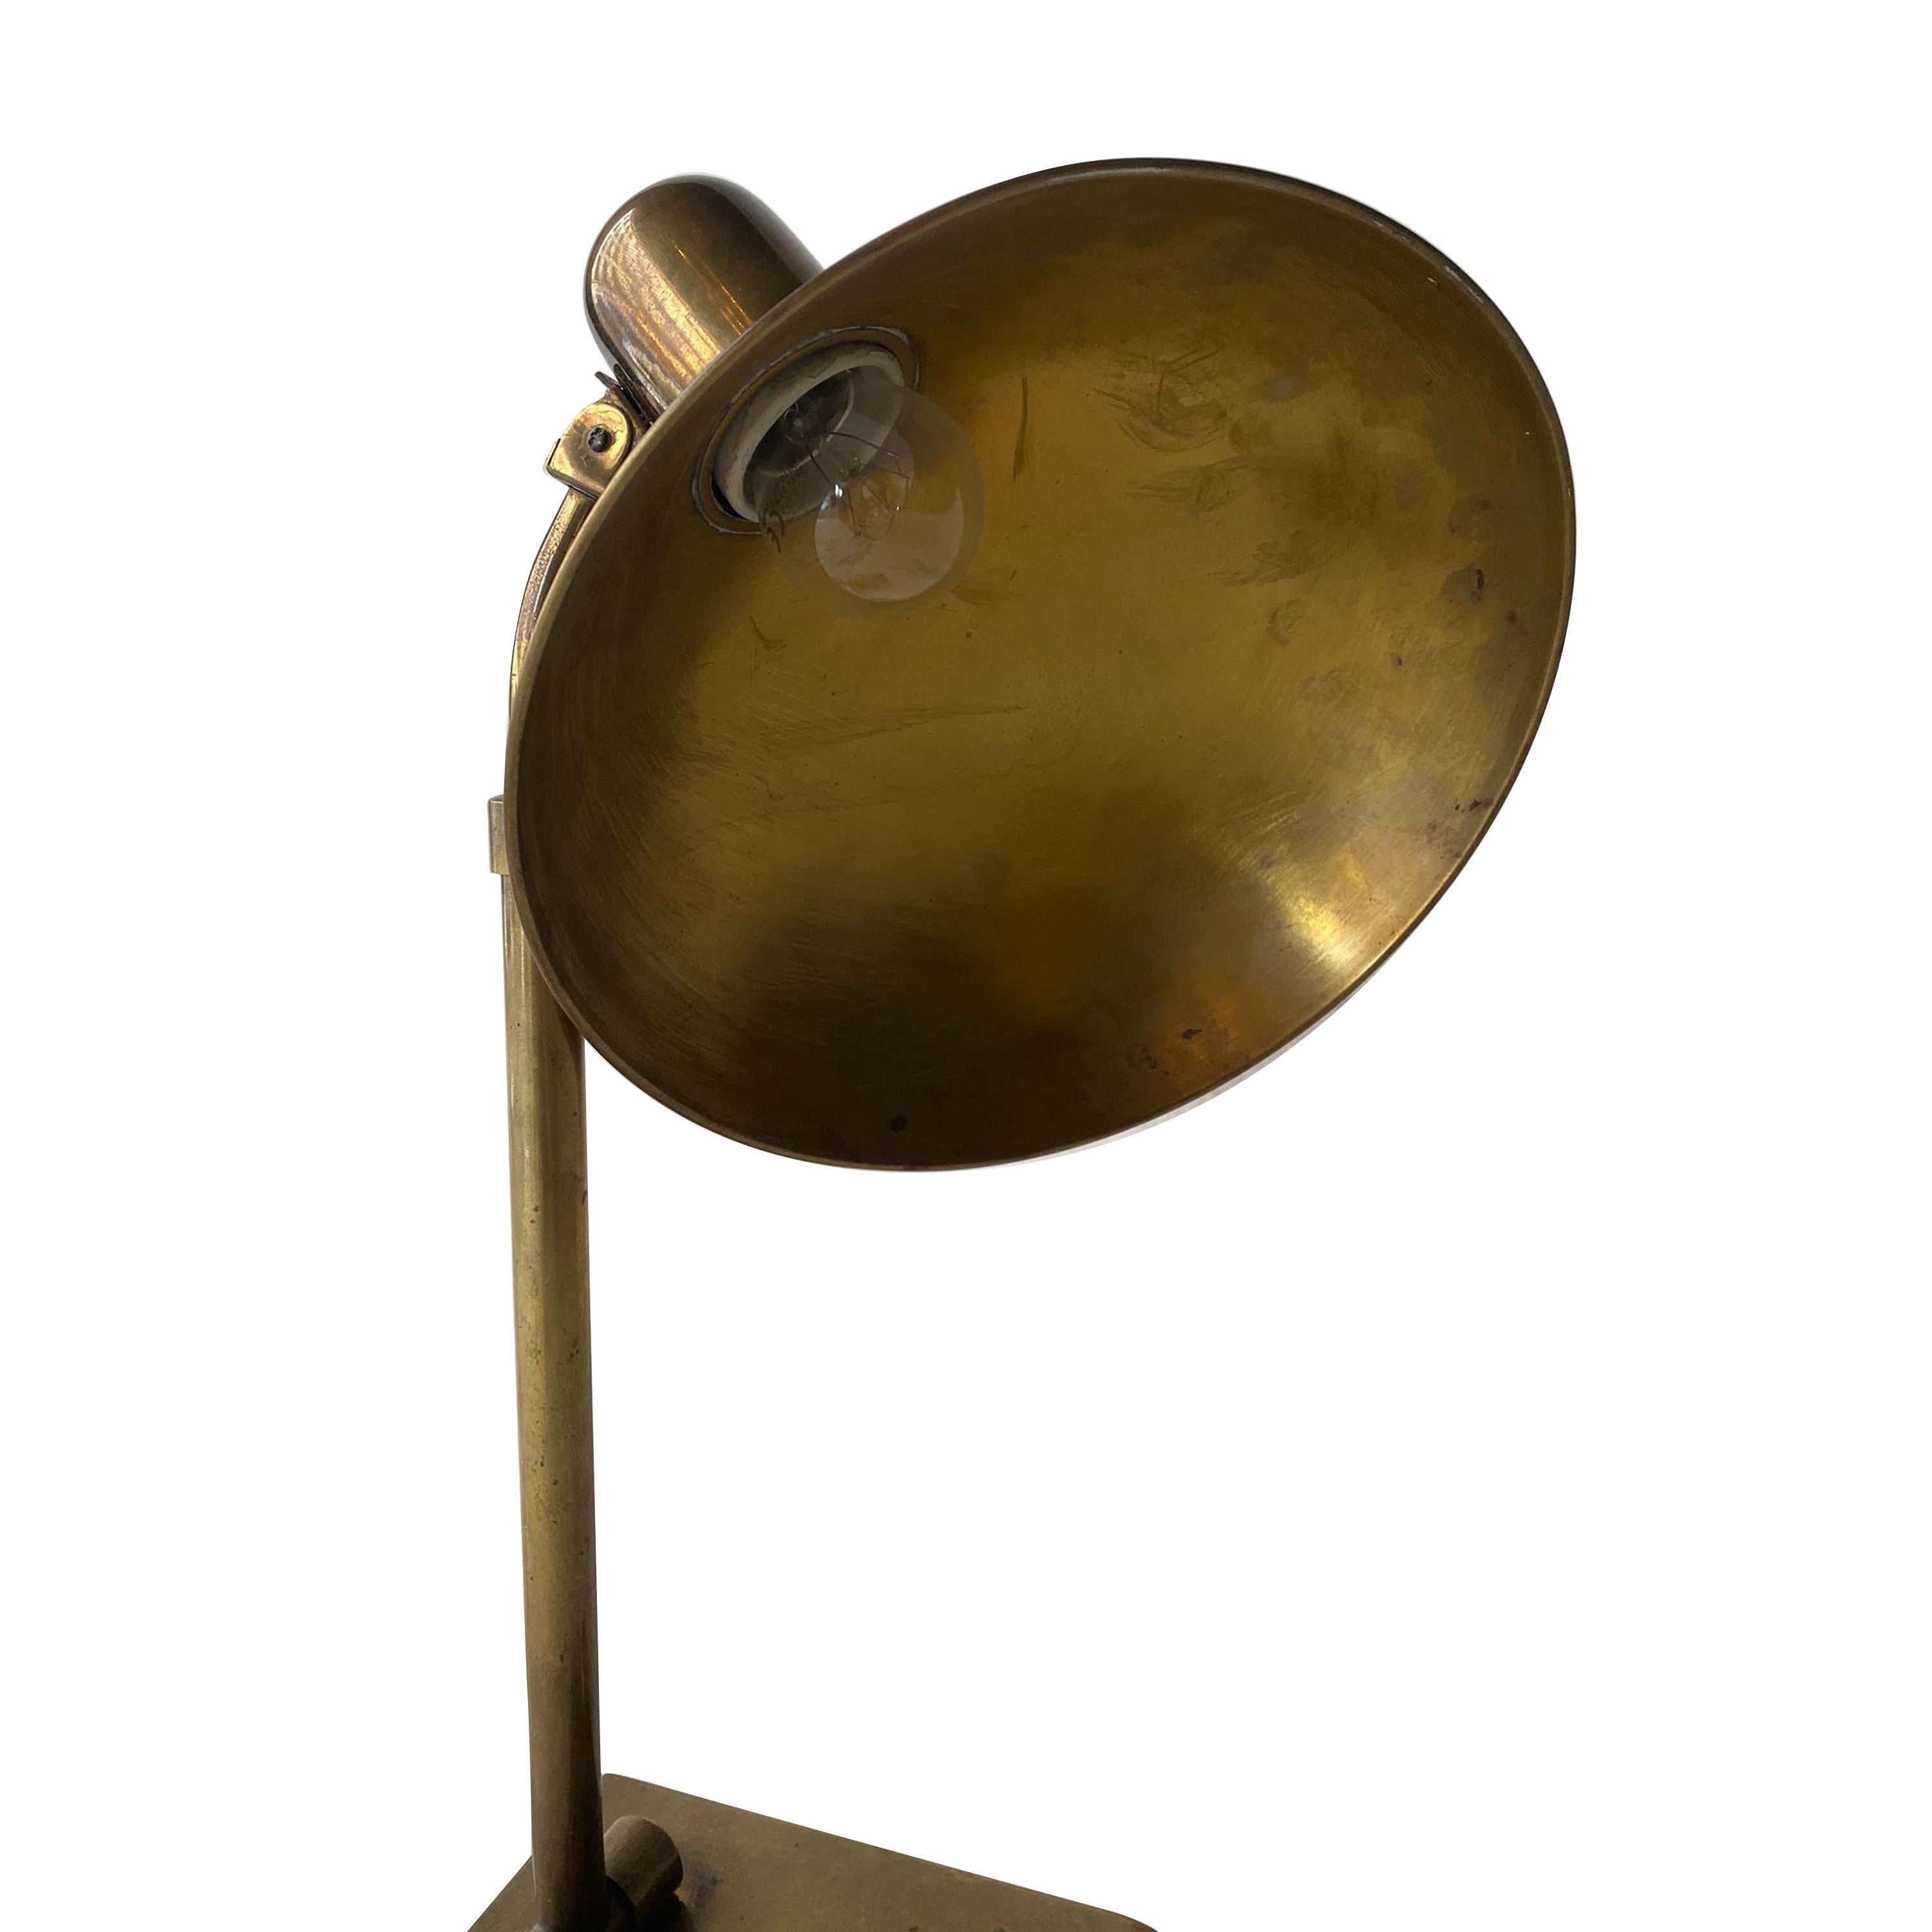 Brass regulable table lamp with a circular screen and button to turn it on and off.